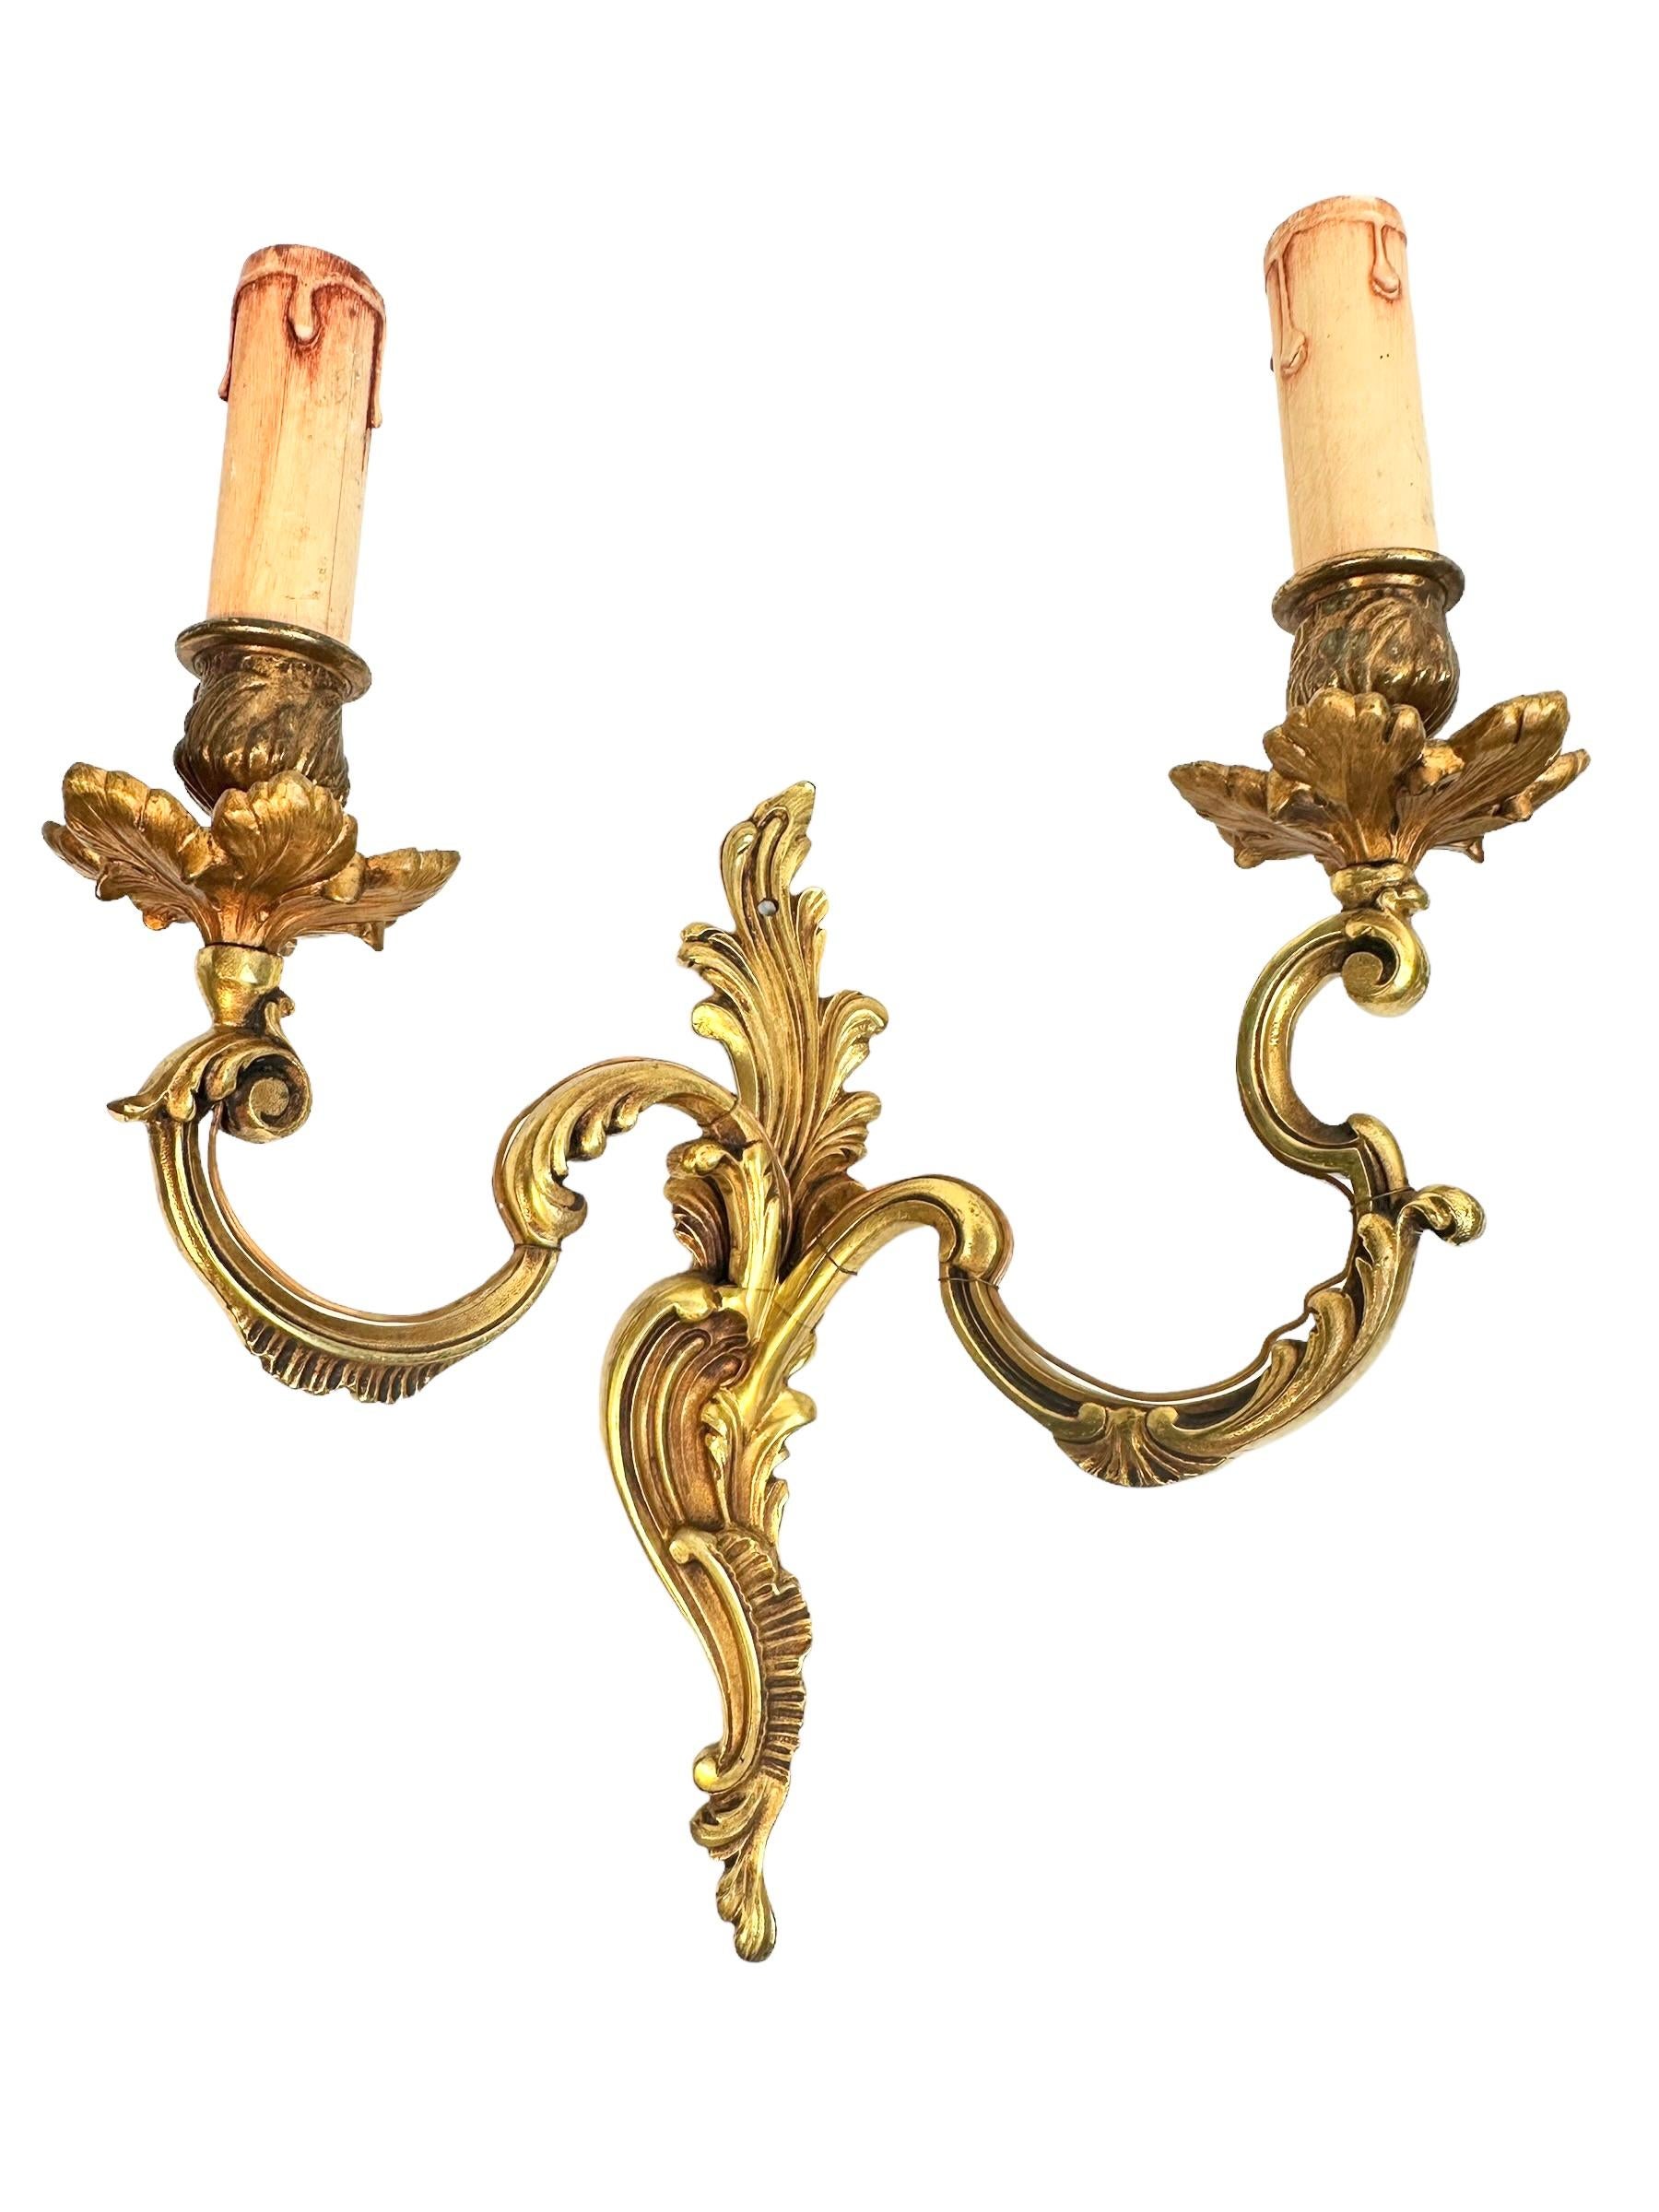 Pair of nice Sconces. Each fixture requires two European E14 candelabras bulbs, each bulb up to 40 watts. These wall lights have a beautiful patina and gives each room an eclectic statement. Made of bronze metal. Nice addition to any room. Found at